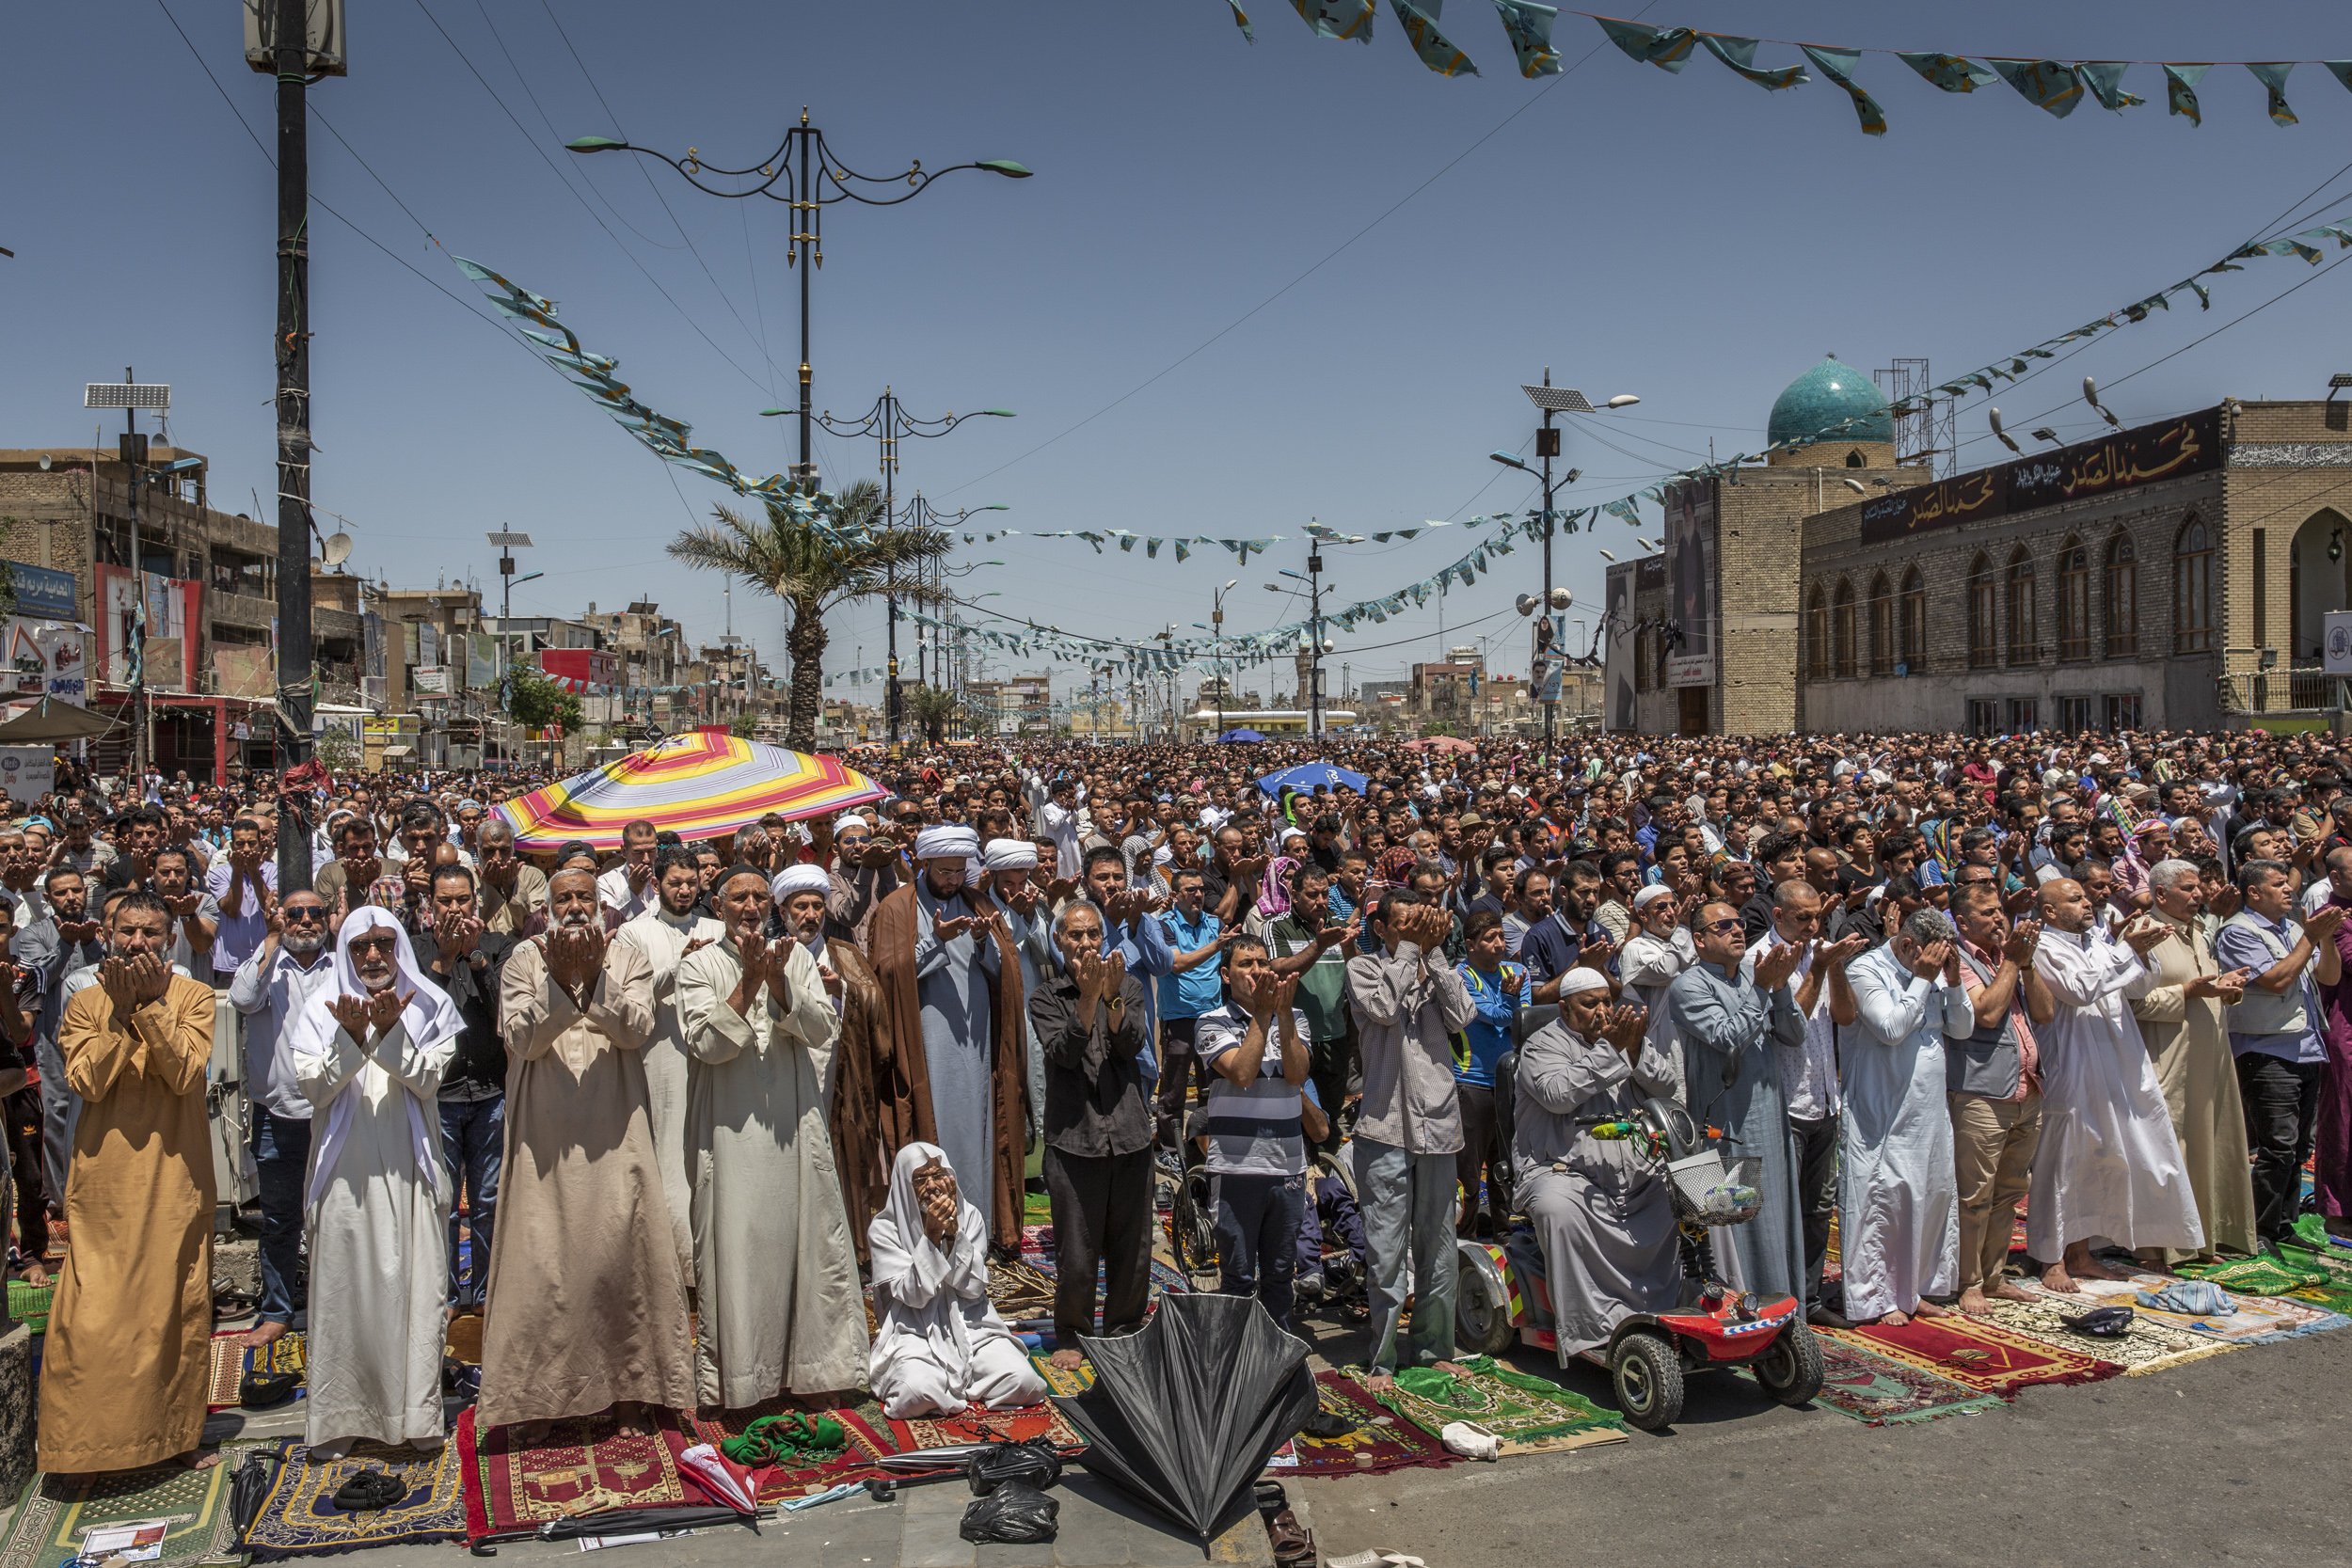  Thousands prayed in front of the al Muhsen mosque in Sadr City, the predominantly Shiite enclave in Baghdad, on the eve before general elections in 2018. 